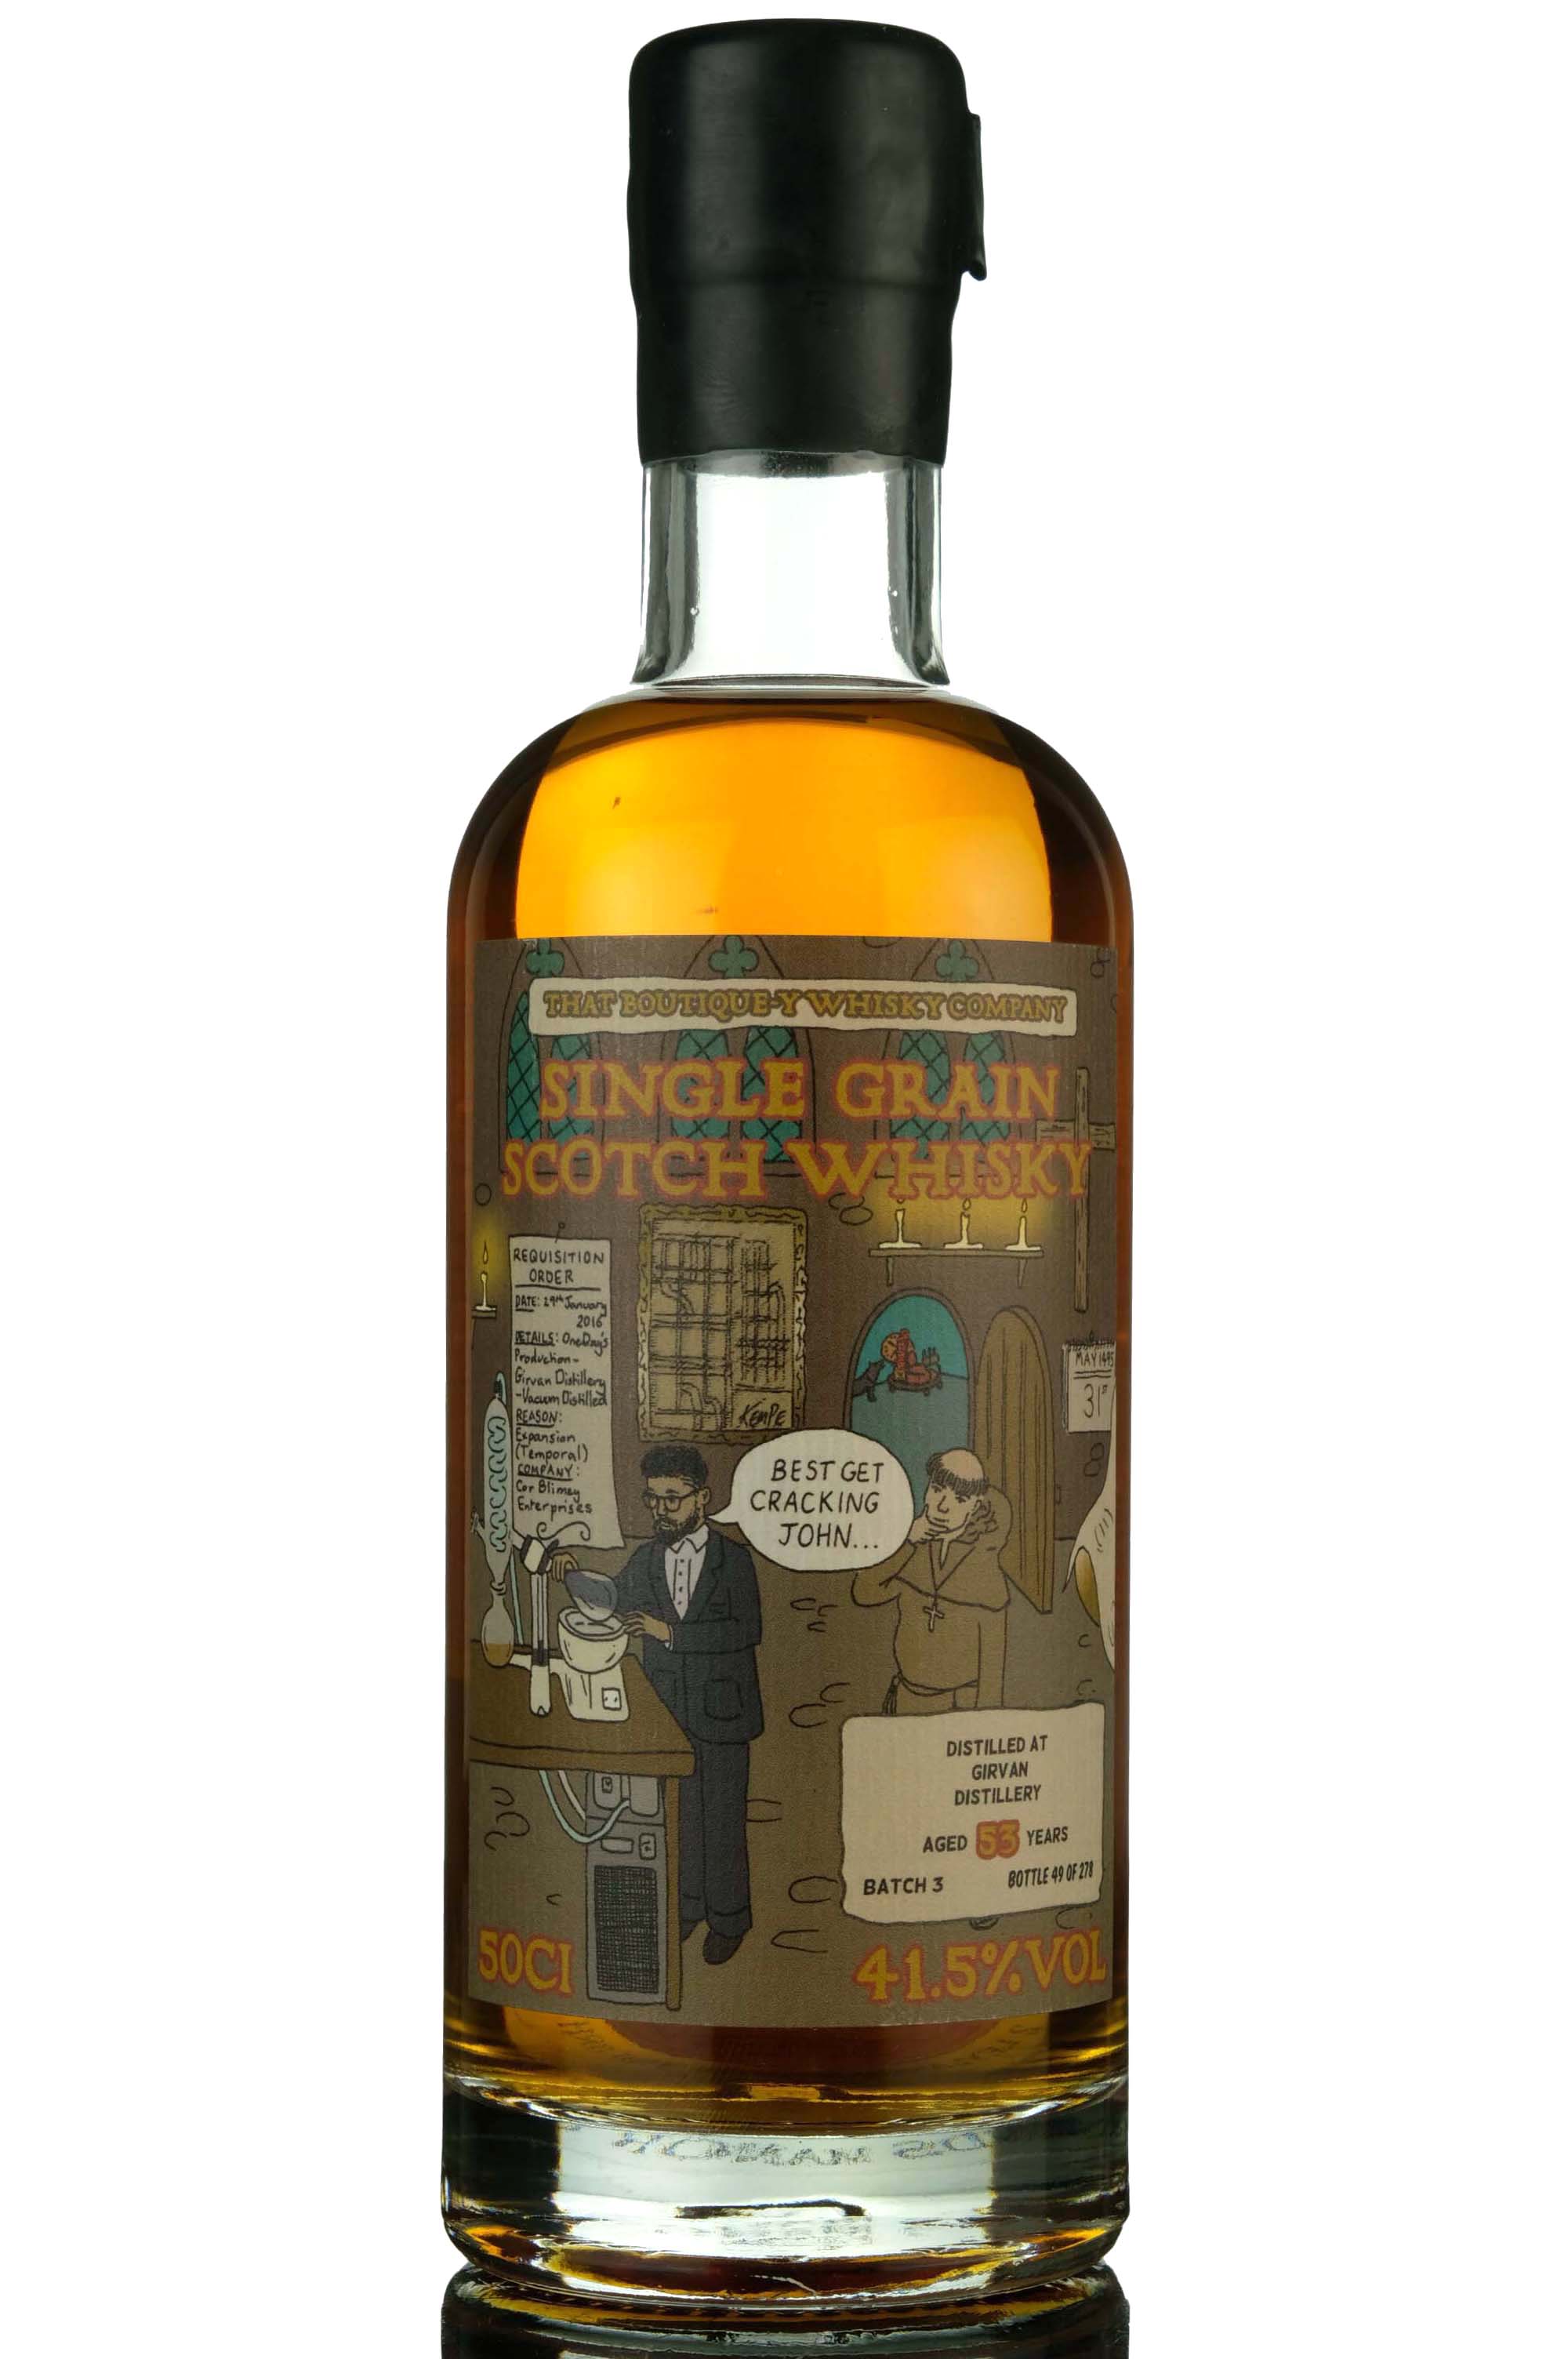 Girvan 53 Year Old - That Boutique-y Whisky Company - Batch 3 - 2017 Release